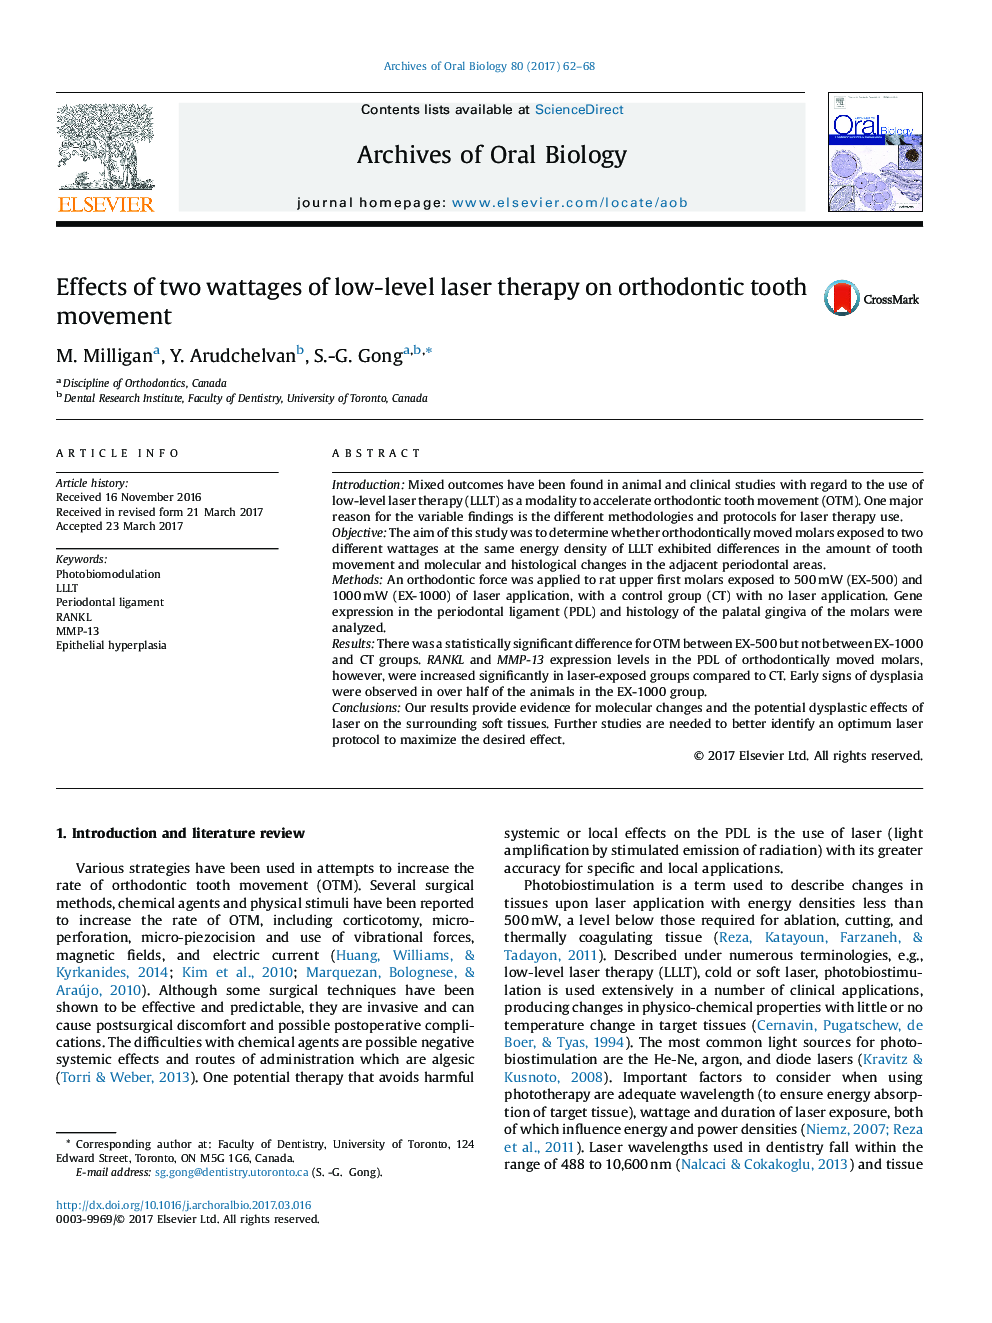 Effects of two wattages of low-level laser therapy on orthodontic tooth movement